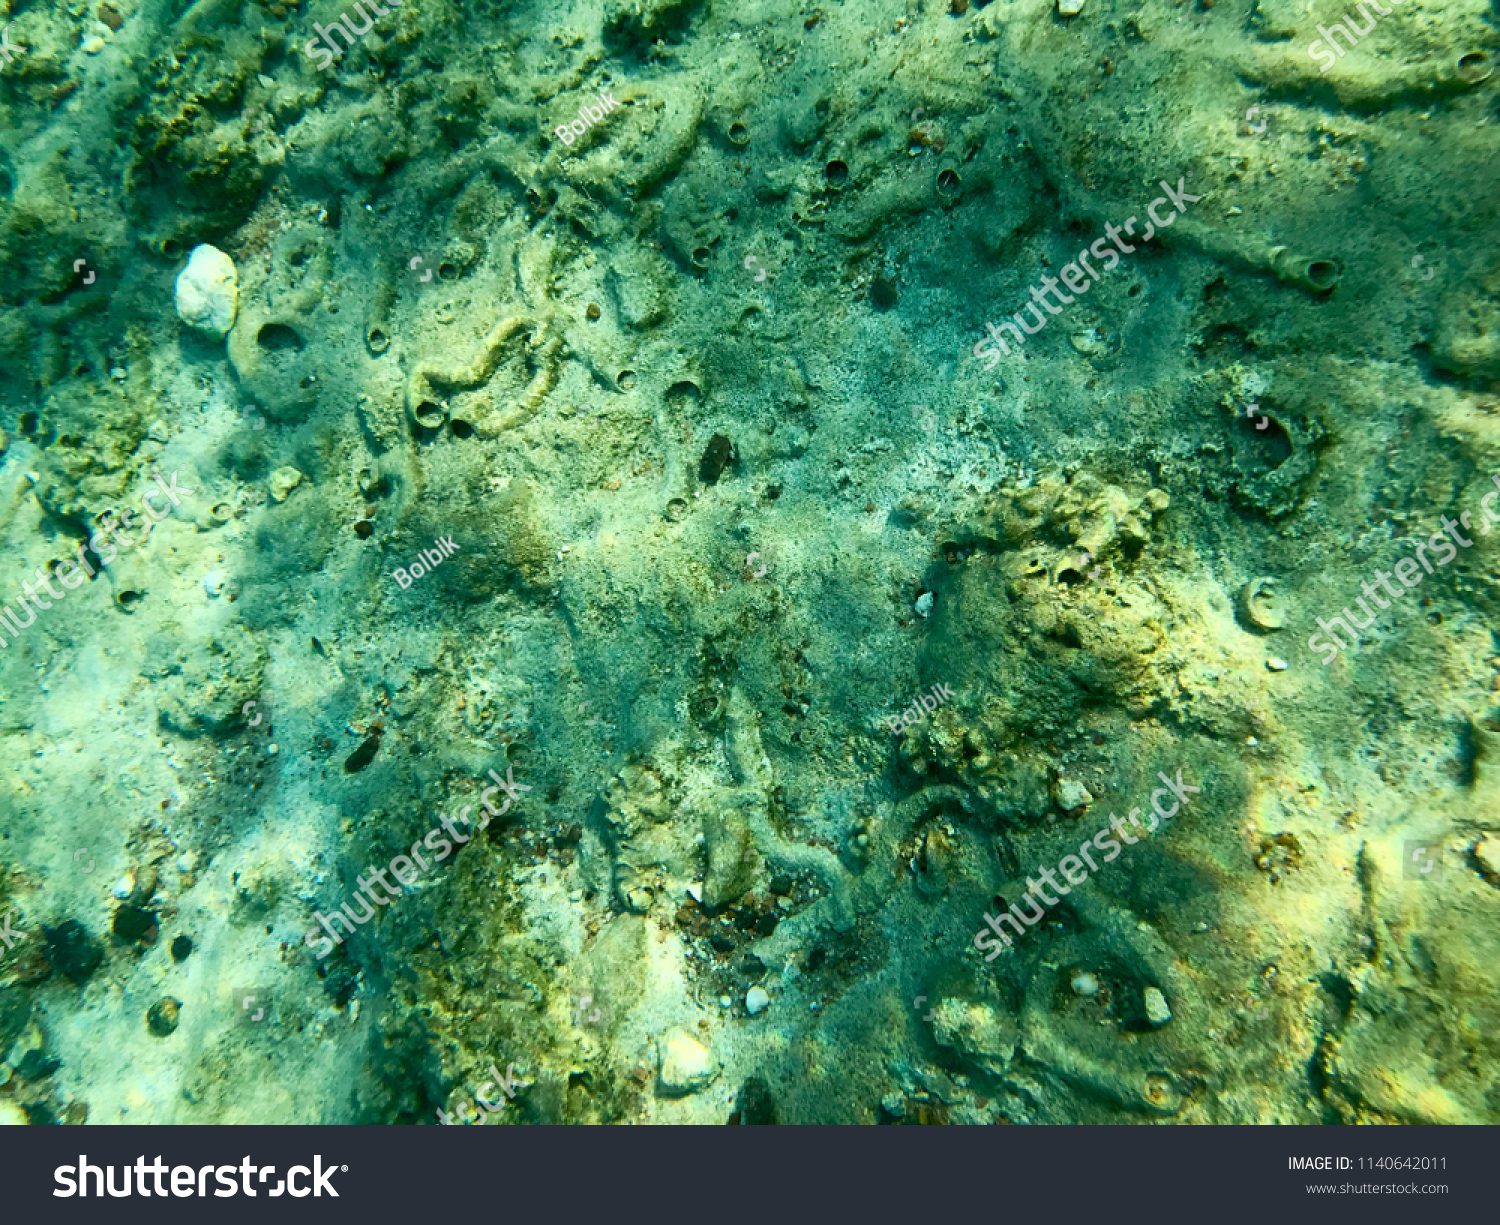 Texture of stones, earth, seabed with coral reefs and algae under blue greenish water, underwater view of the sea, the ocean in a tropical resort. The background. #1140642011